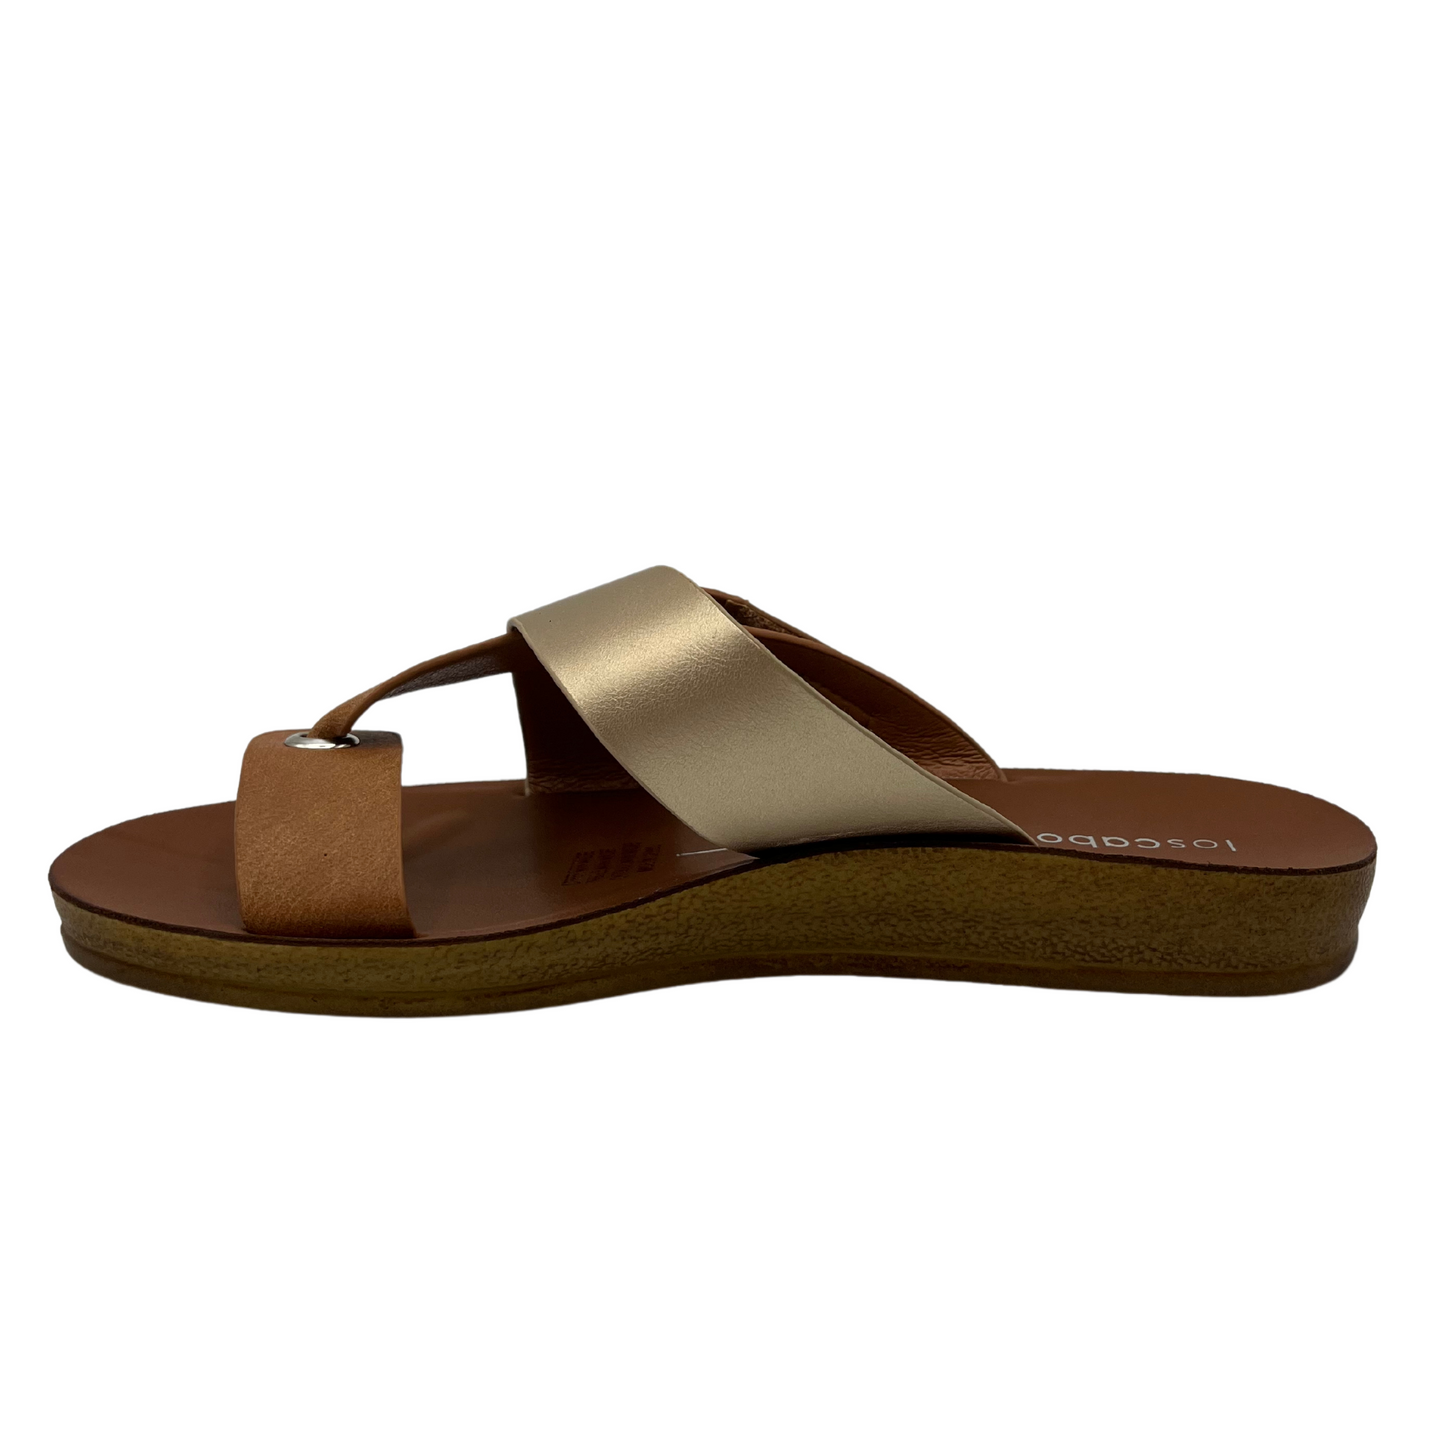 Left facing view of brown and gold strapped sandal with toe strap and velcro closure